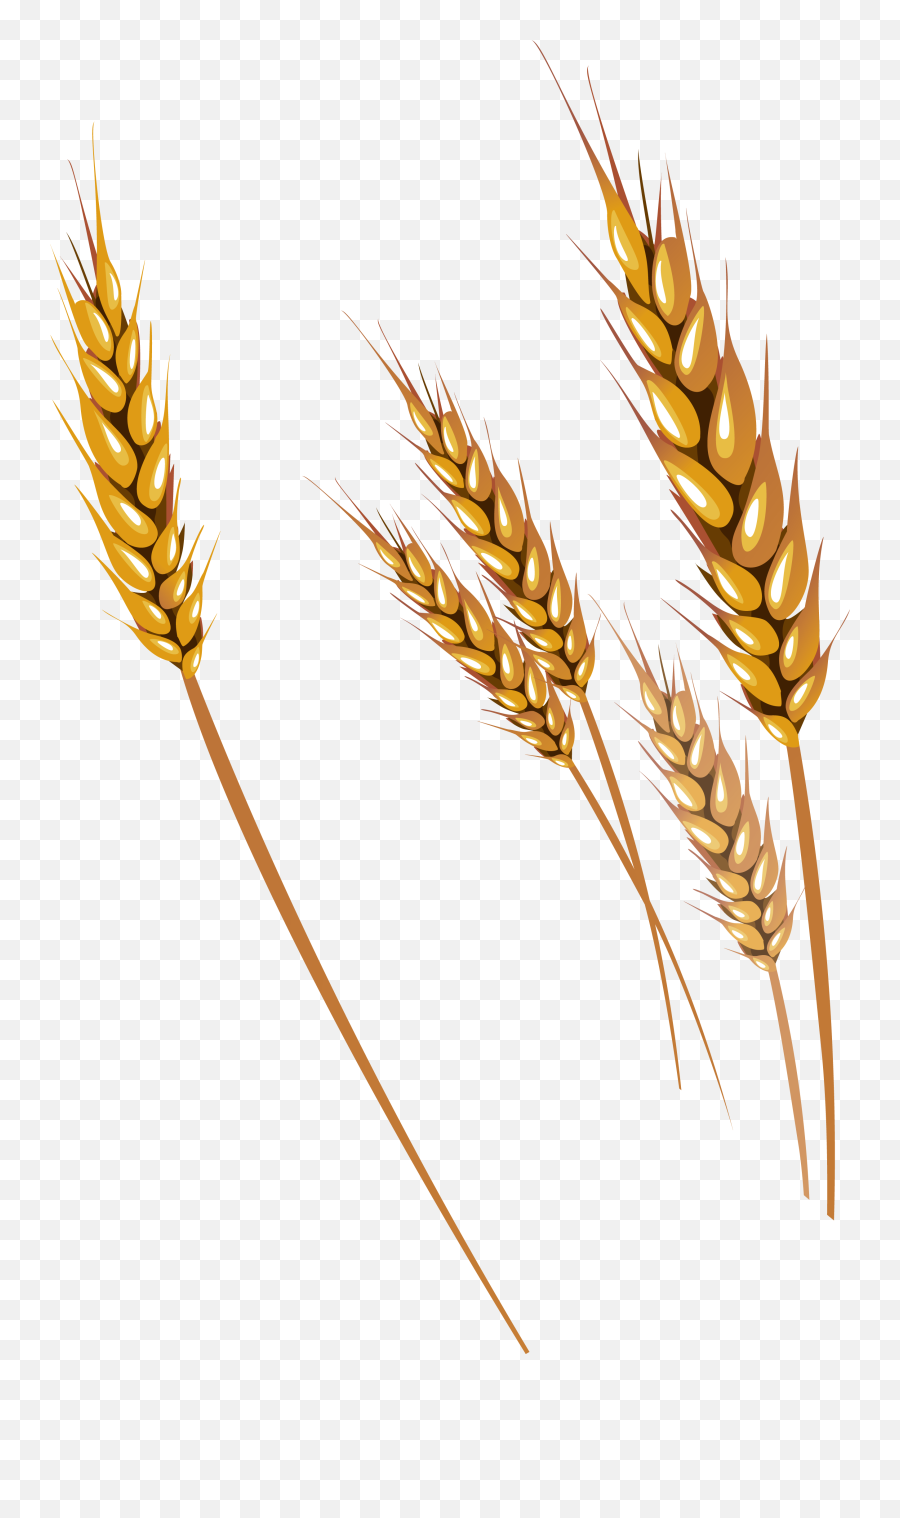 Free Png Wheat Images Transparent - Vector Clip Art Wheat,Wheat Transparent